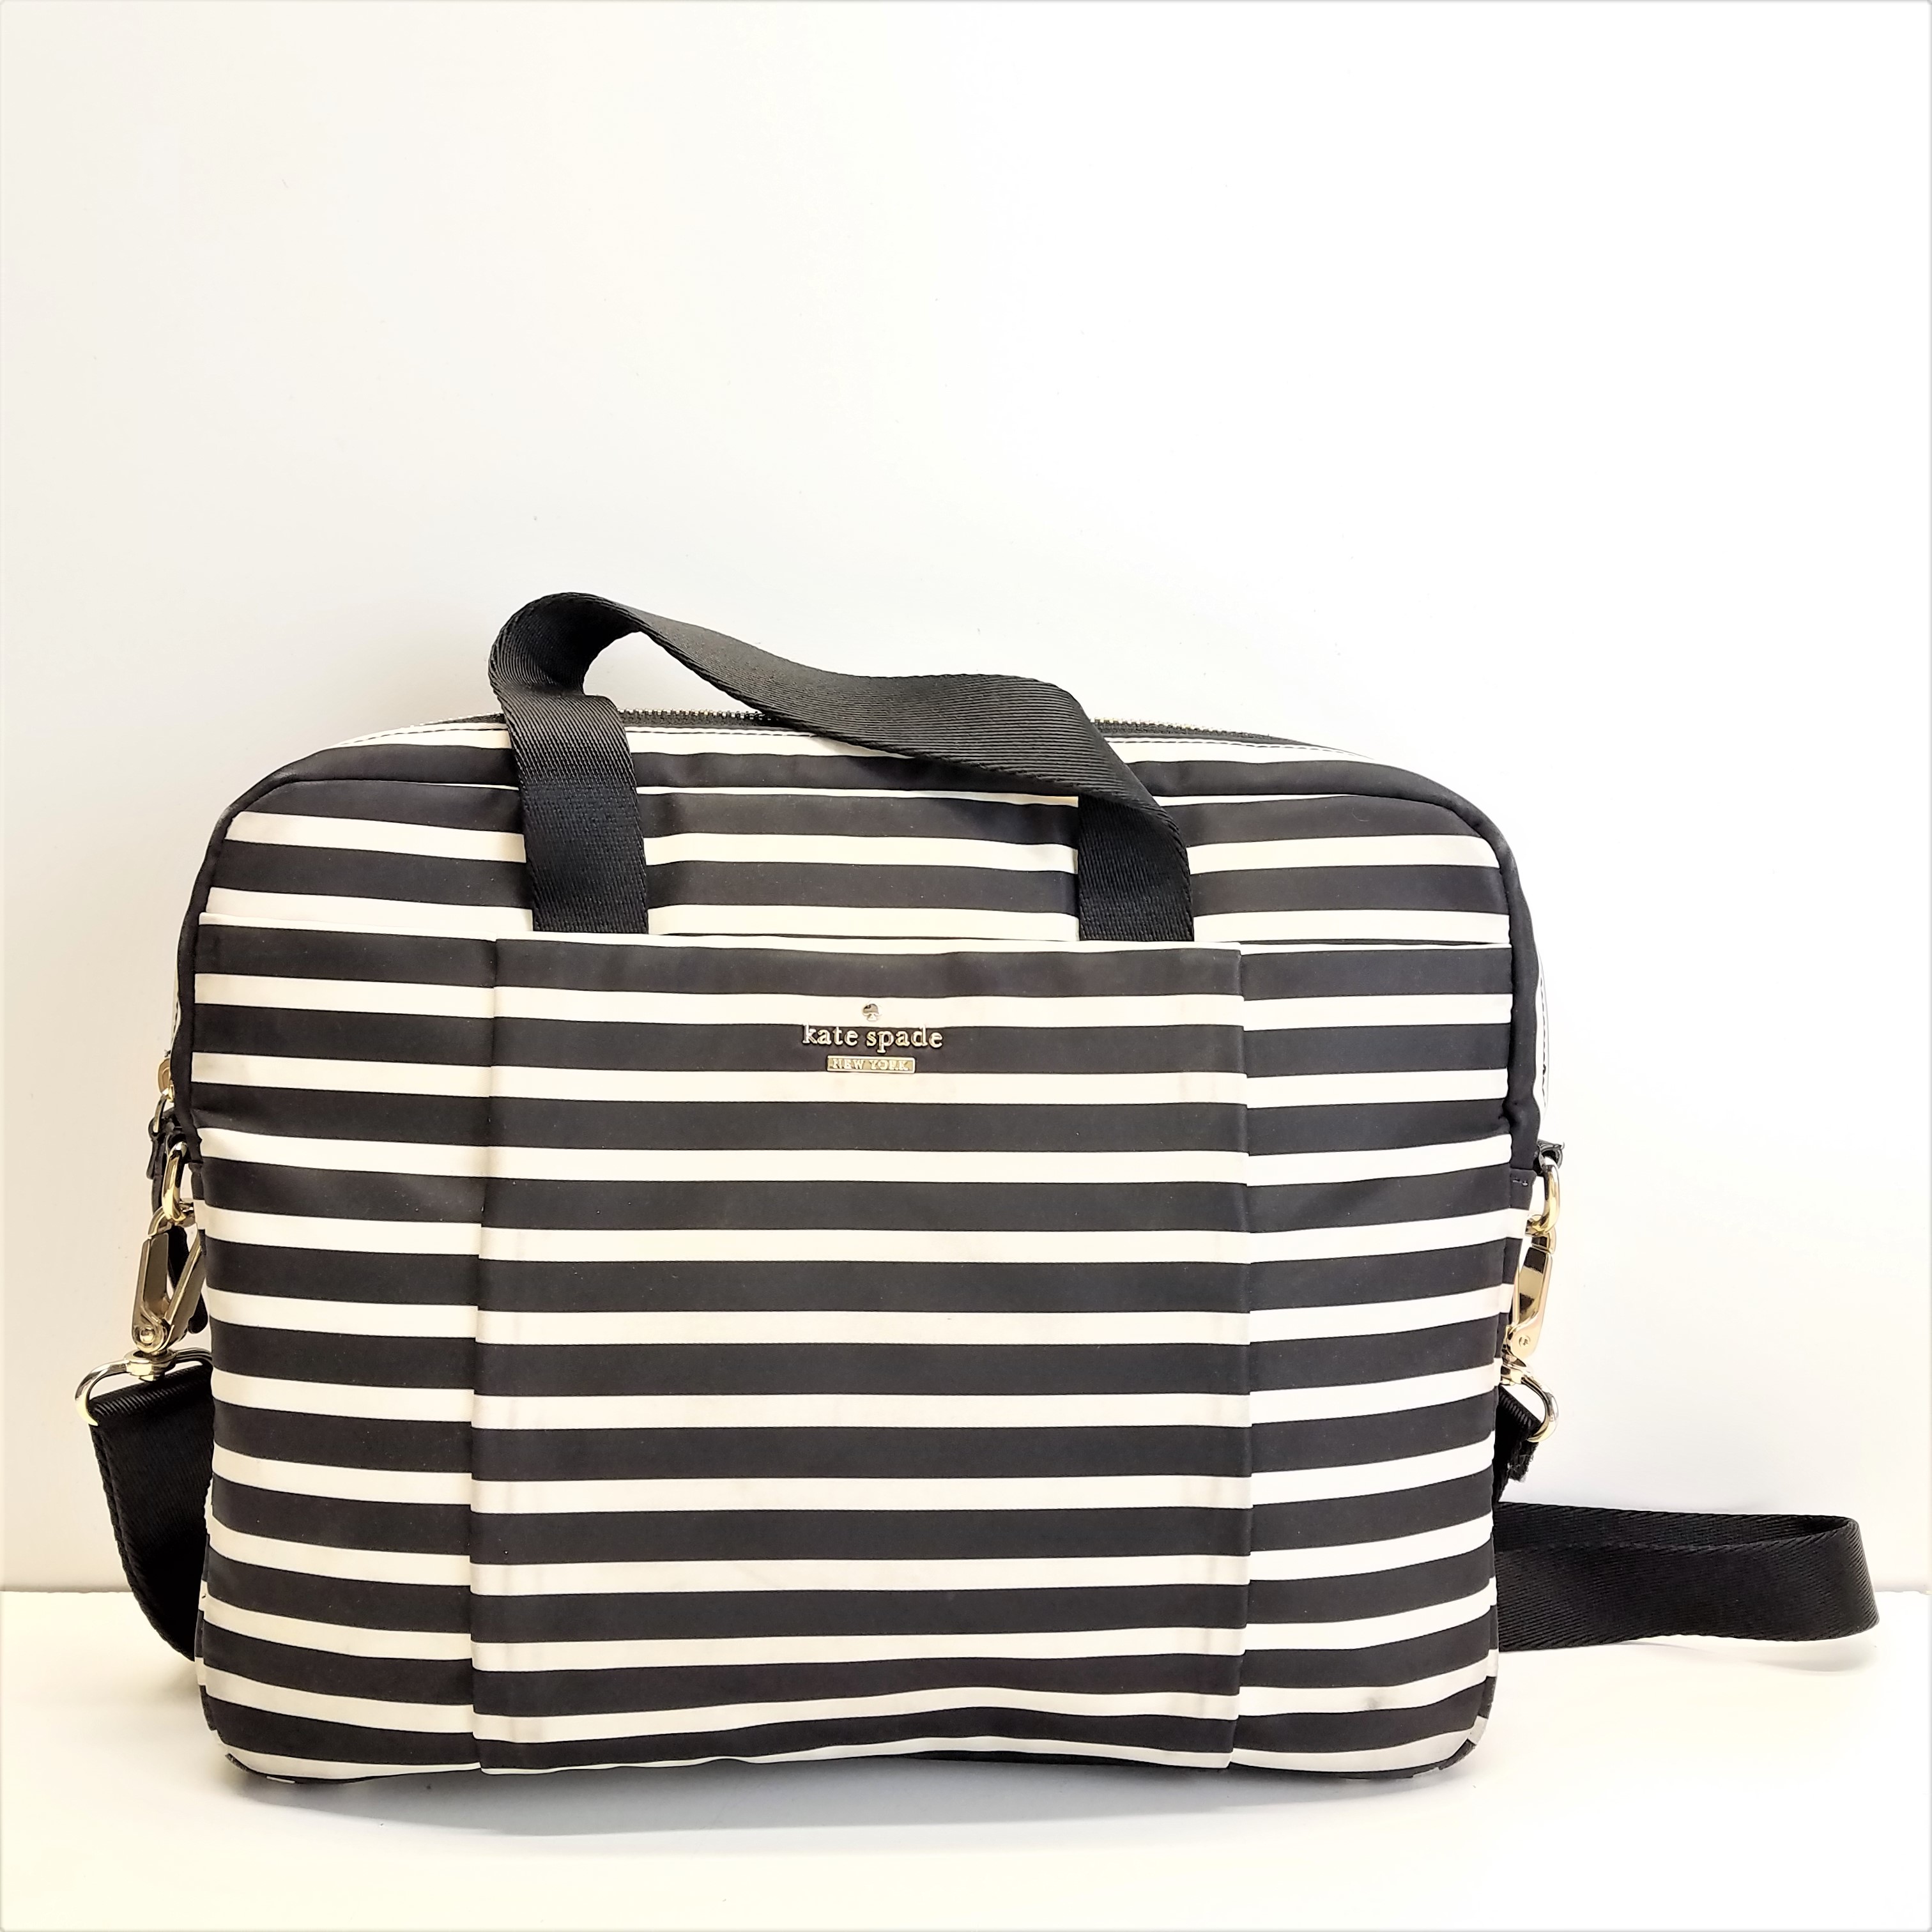 Buy the Kate Spade Striped Laptop Bag | GoodwillFinds